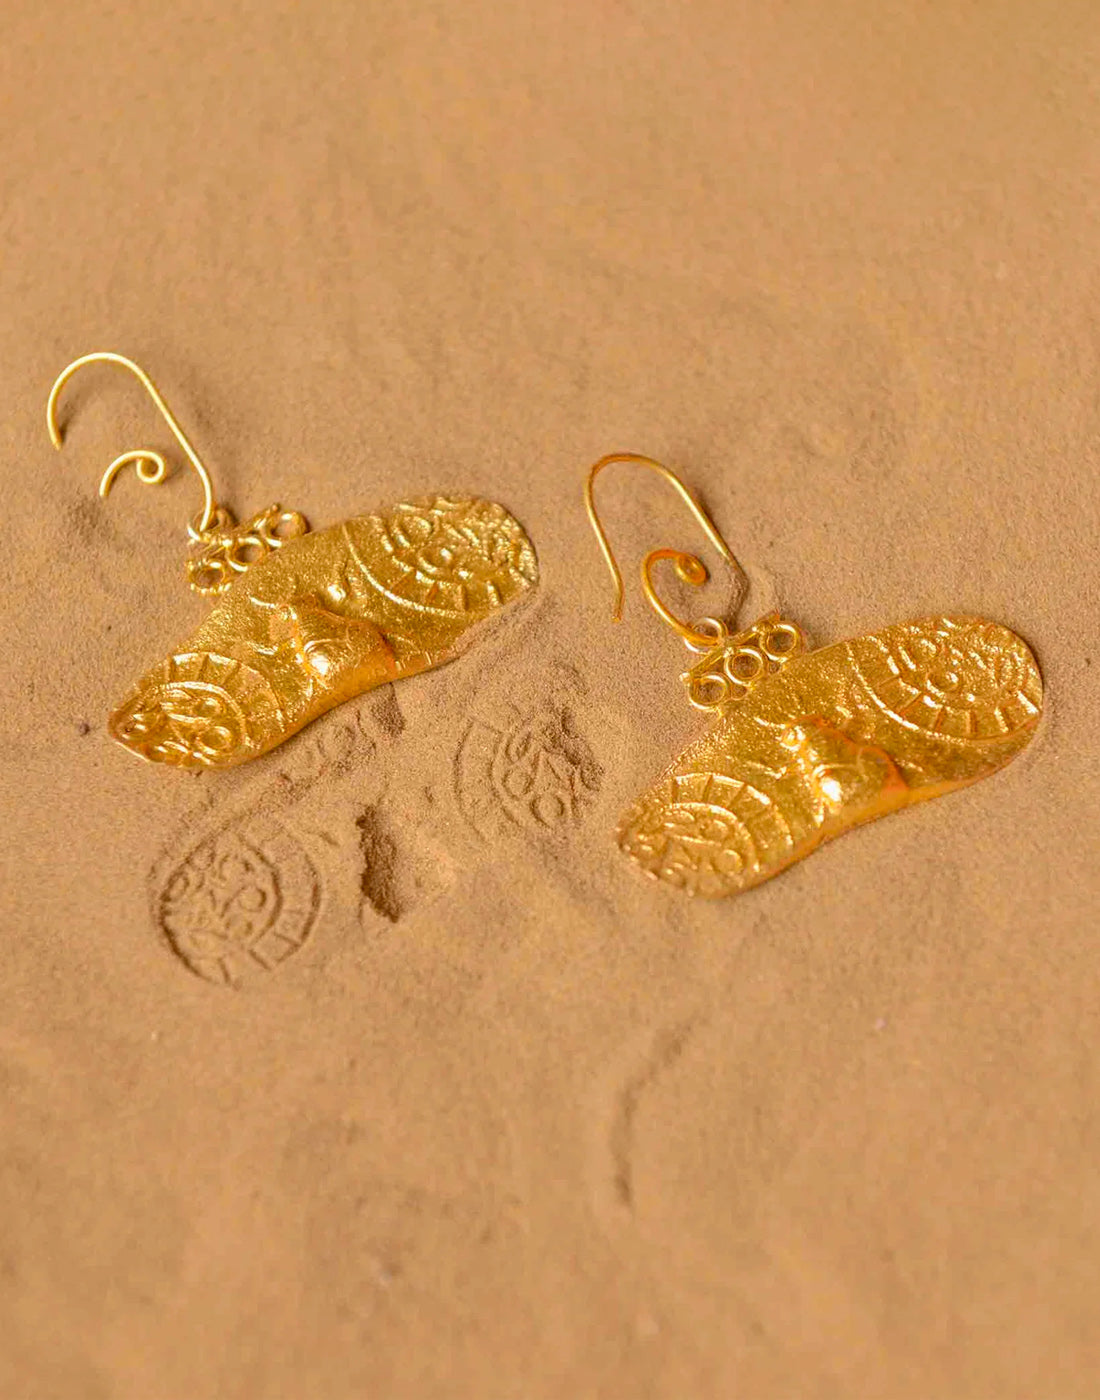 Fossil Danglers 5 - Statement Earrings - Gold-Plated & Hypoallergenic Jewellery - Made in India - Dubai Jewellery - Dori